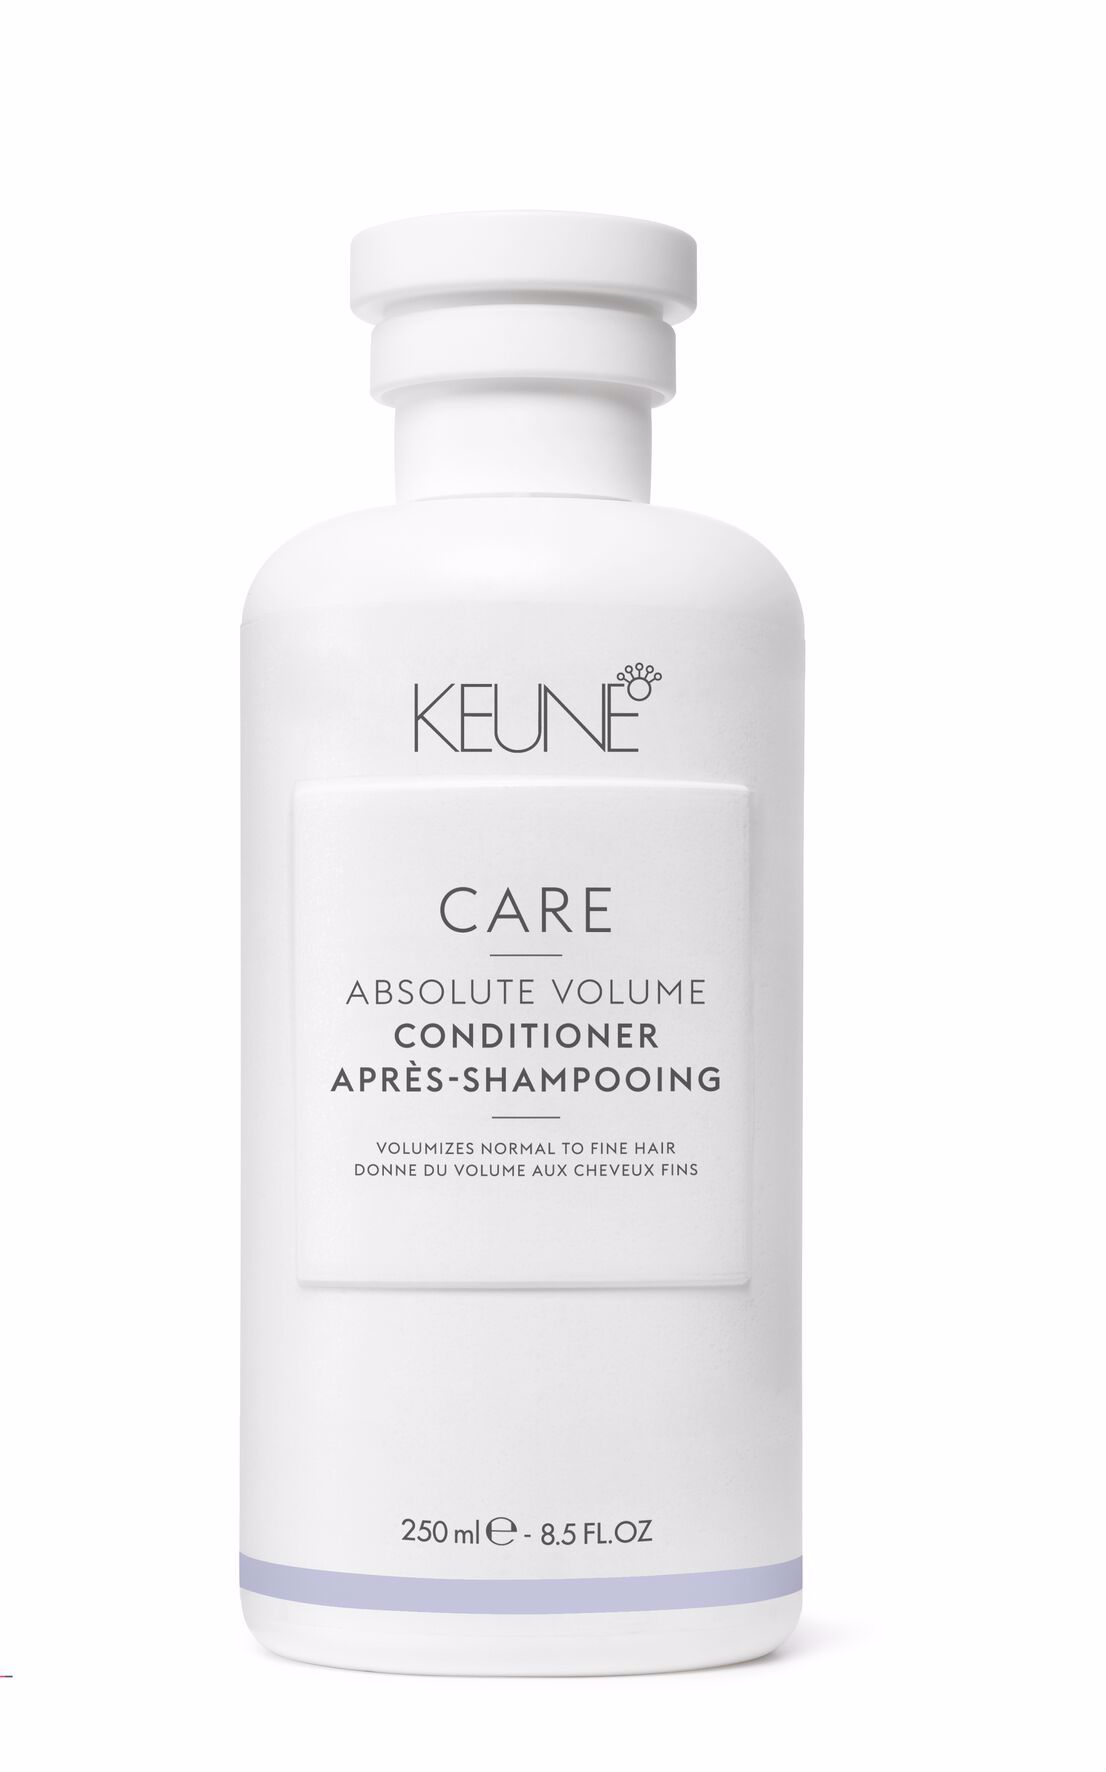 The Care Absolute Volume Conditioner gives strength and volume to fine, thin hair without weighing it down. Enriched with Provitamin B5 and wheat proteins for strong hair structure. On keune.ch.